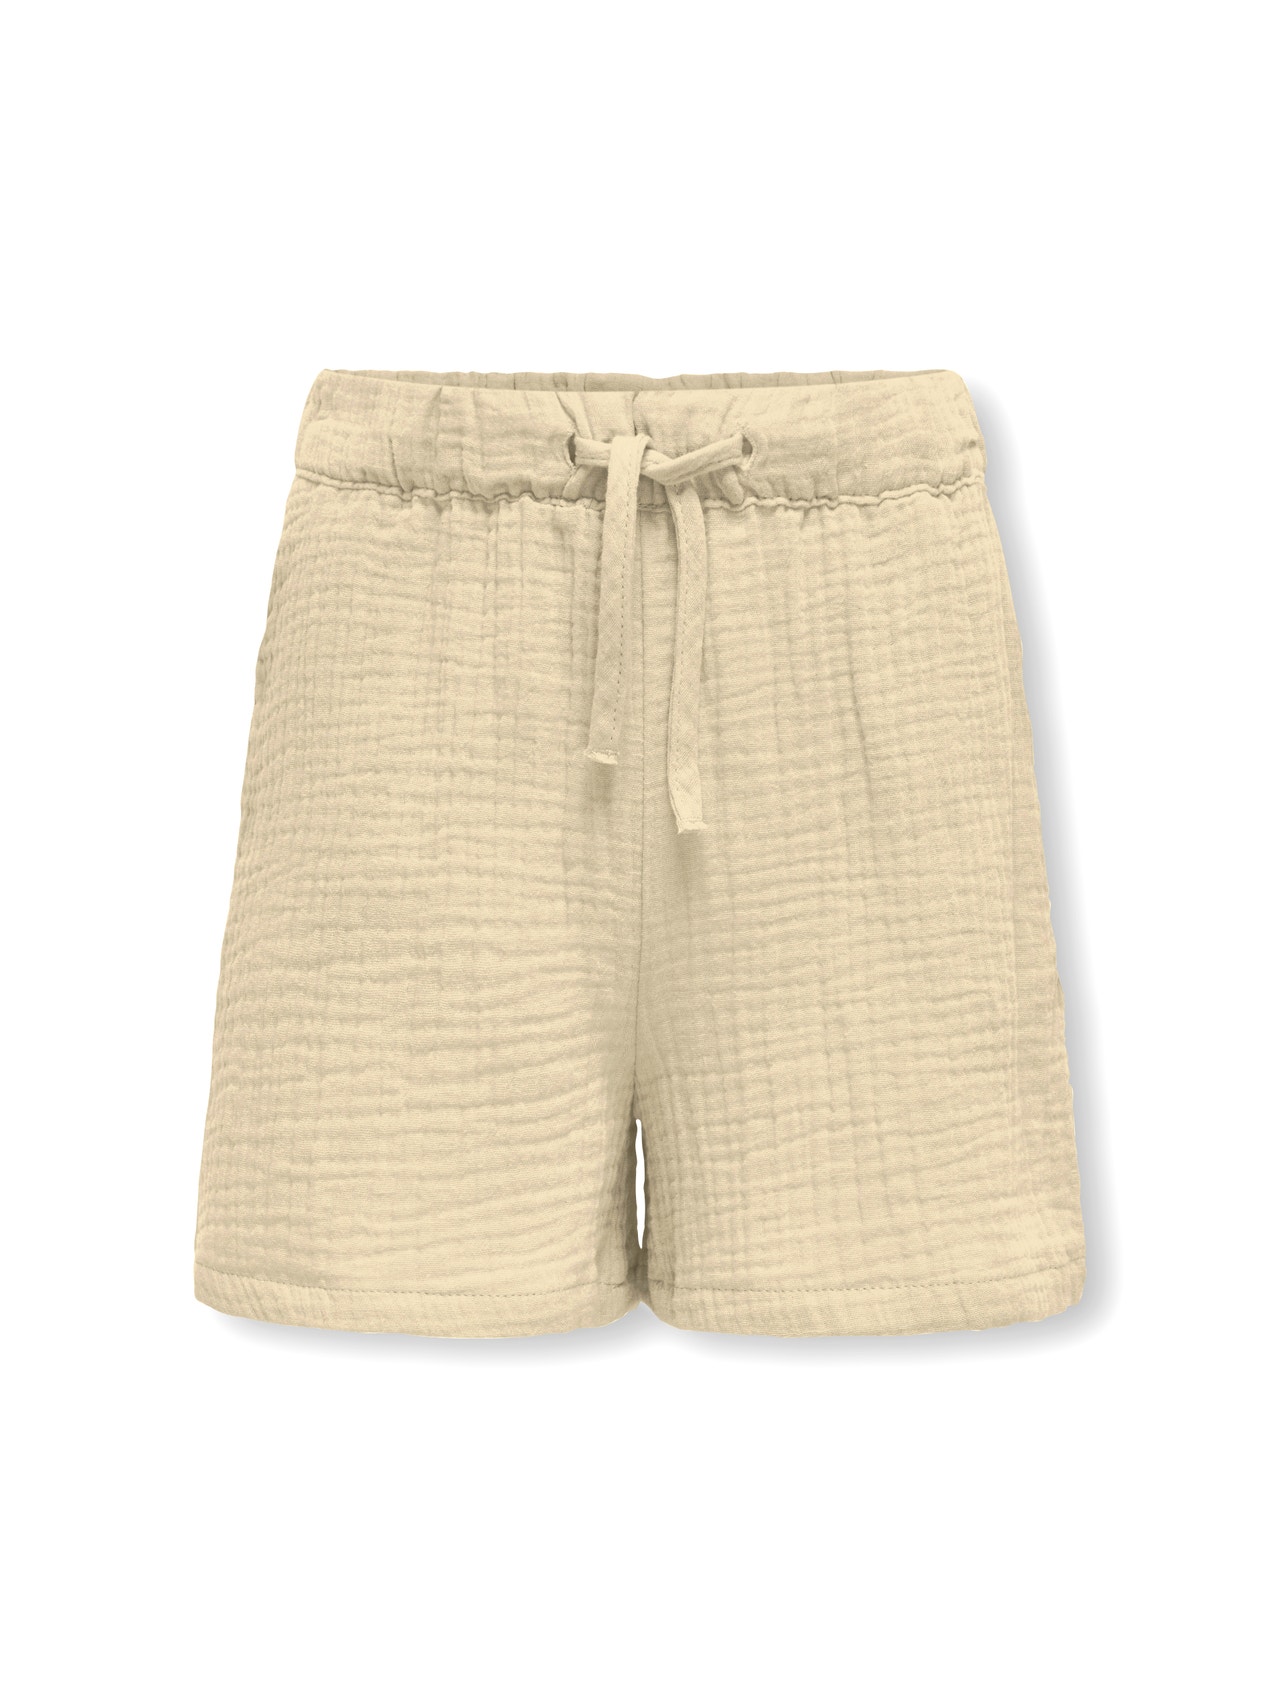 ONLY Normal passform Shorts -Pumice Stone - 15293680